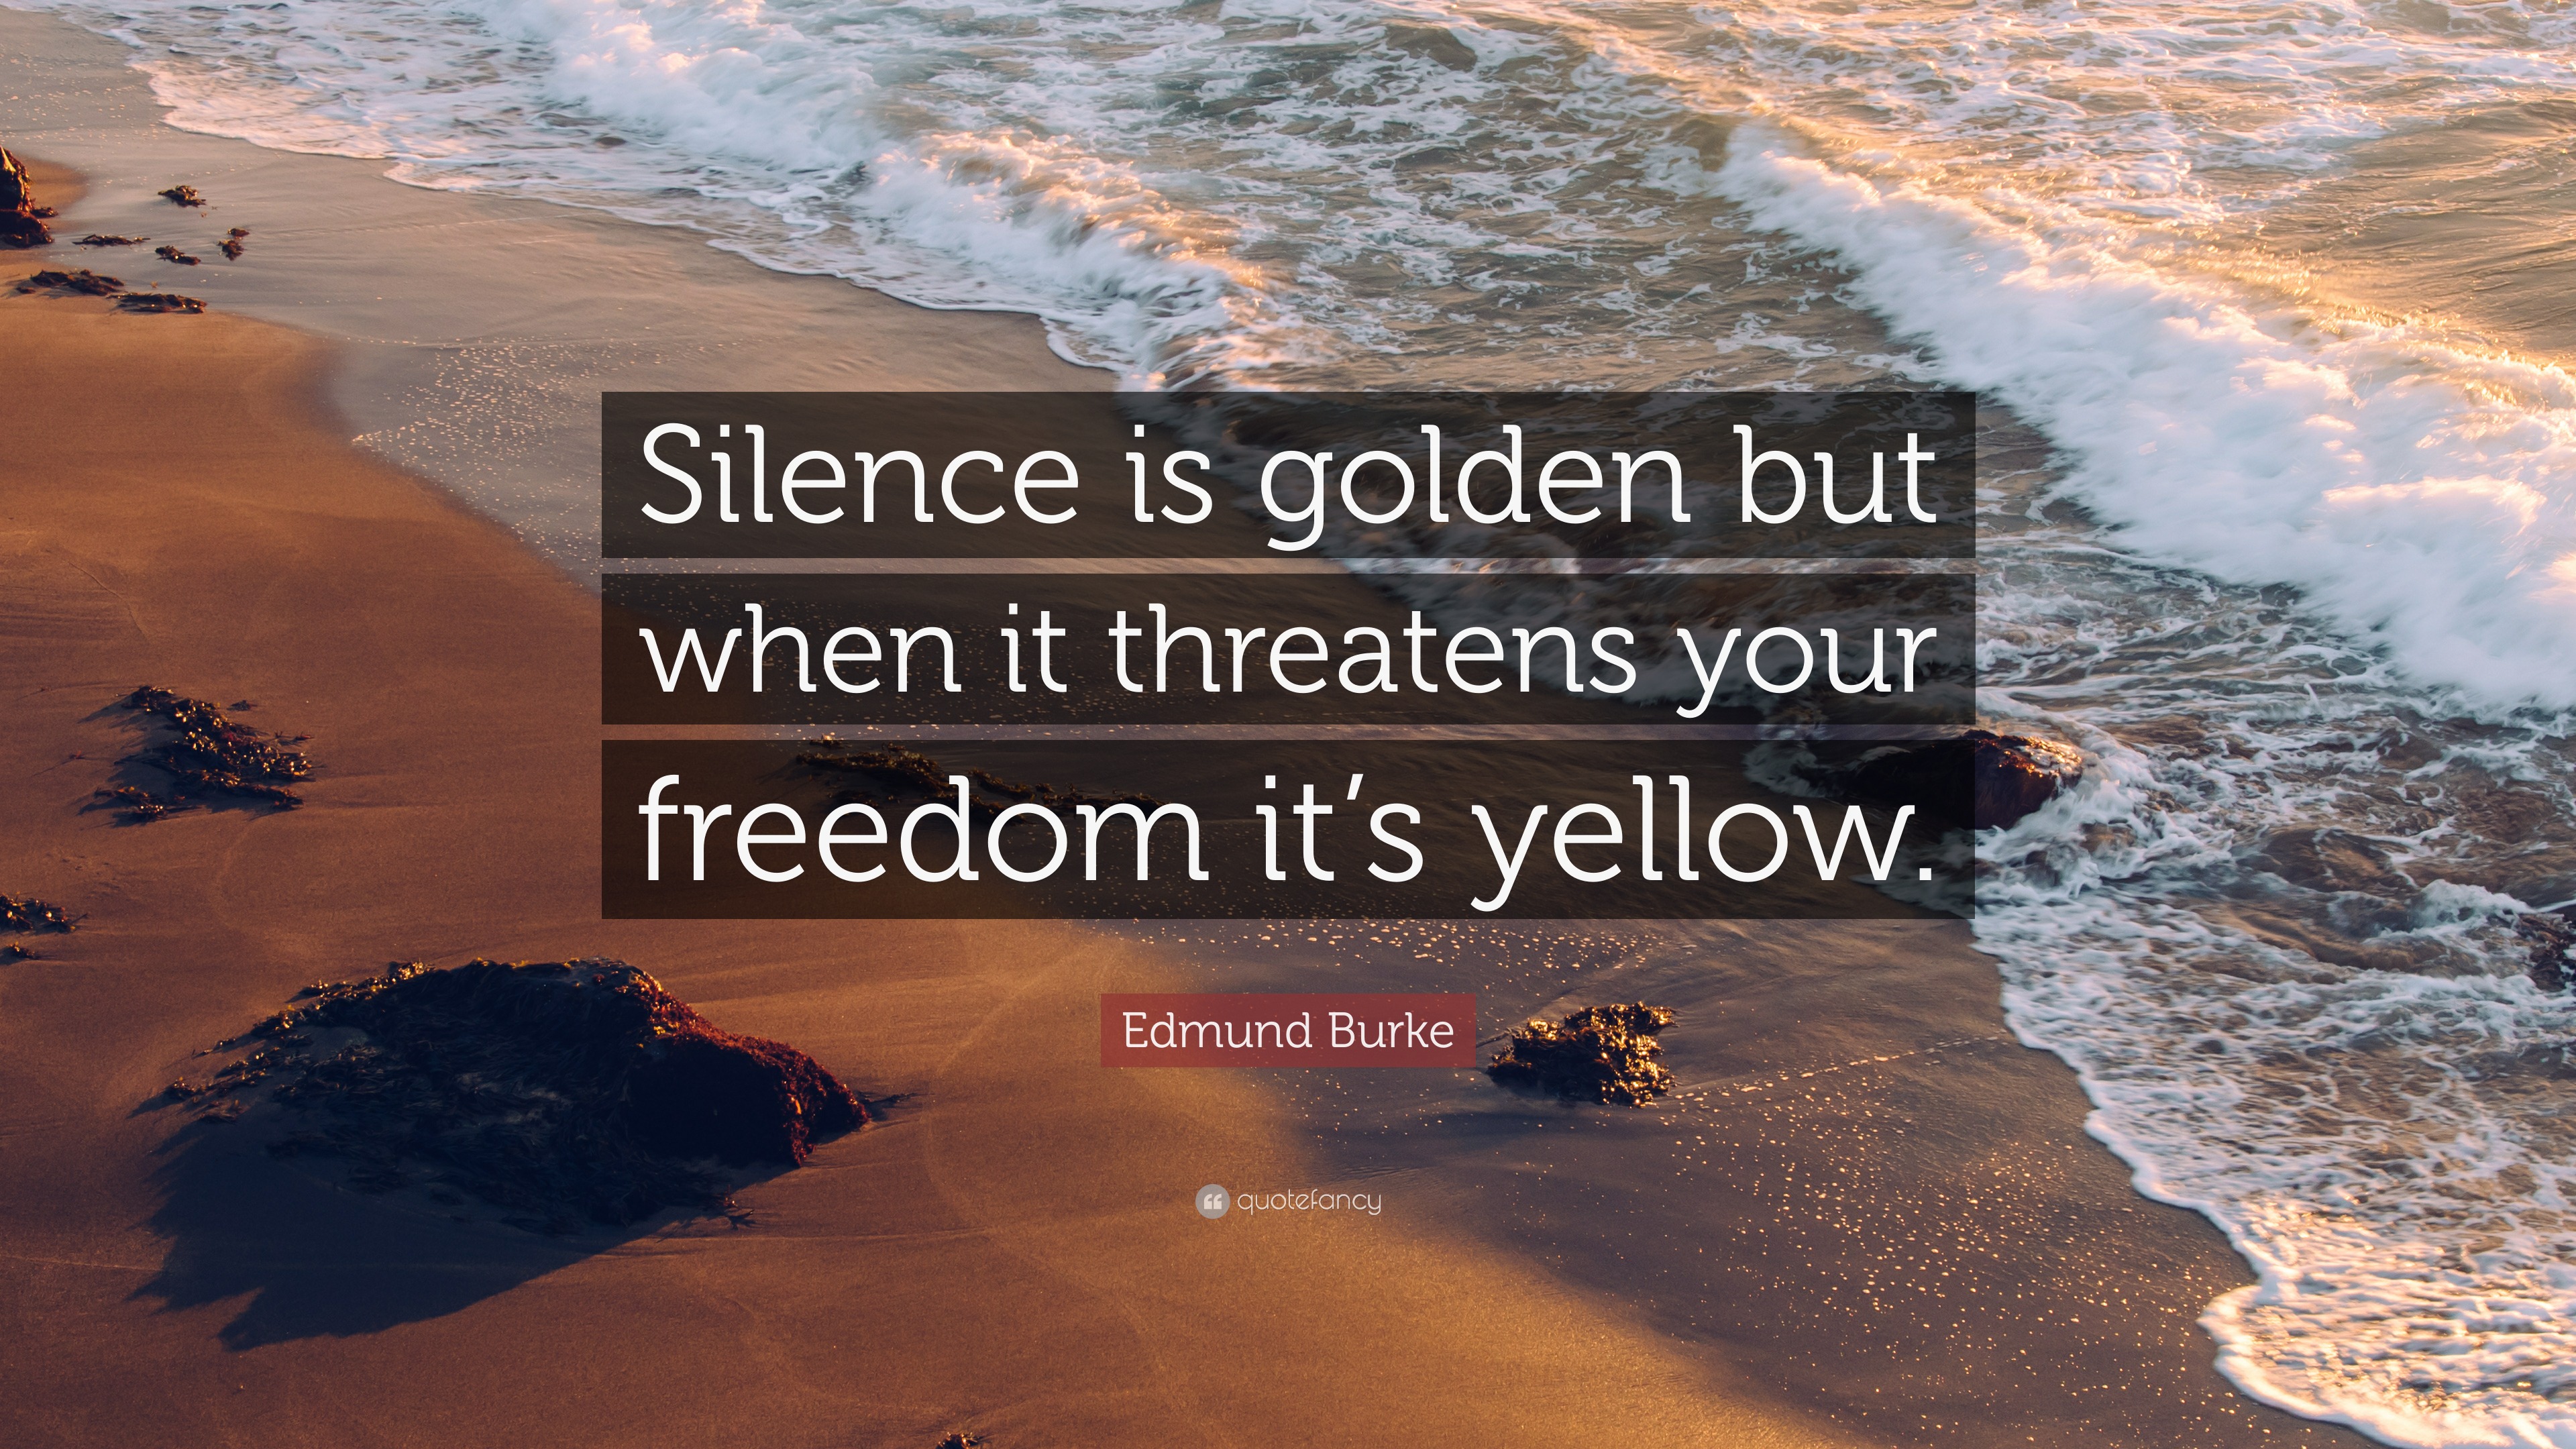 Silence is Golden: 5 Reasons to Enjoy a Moment of Silence